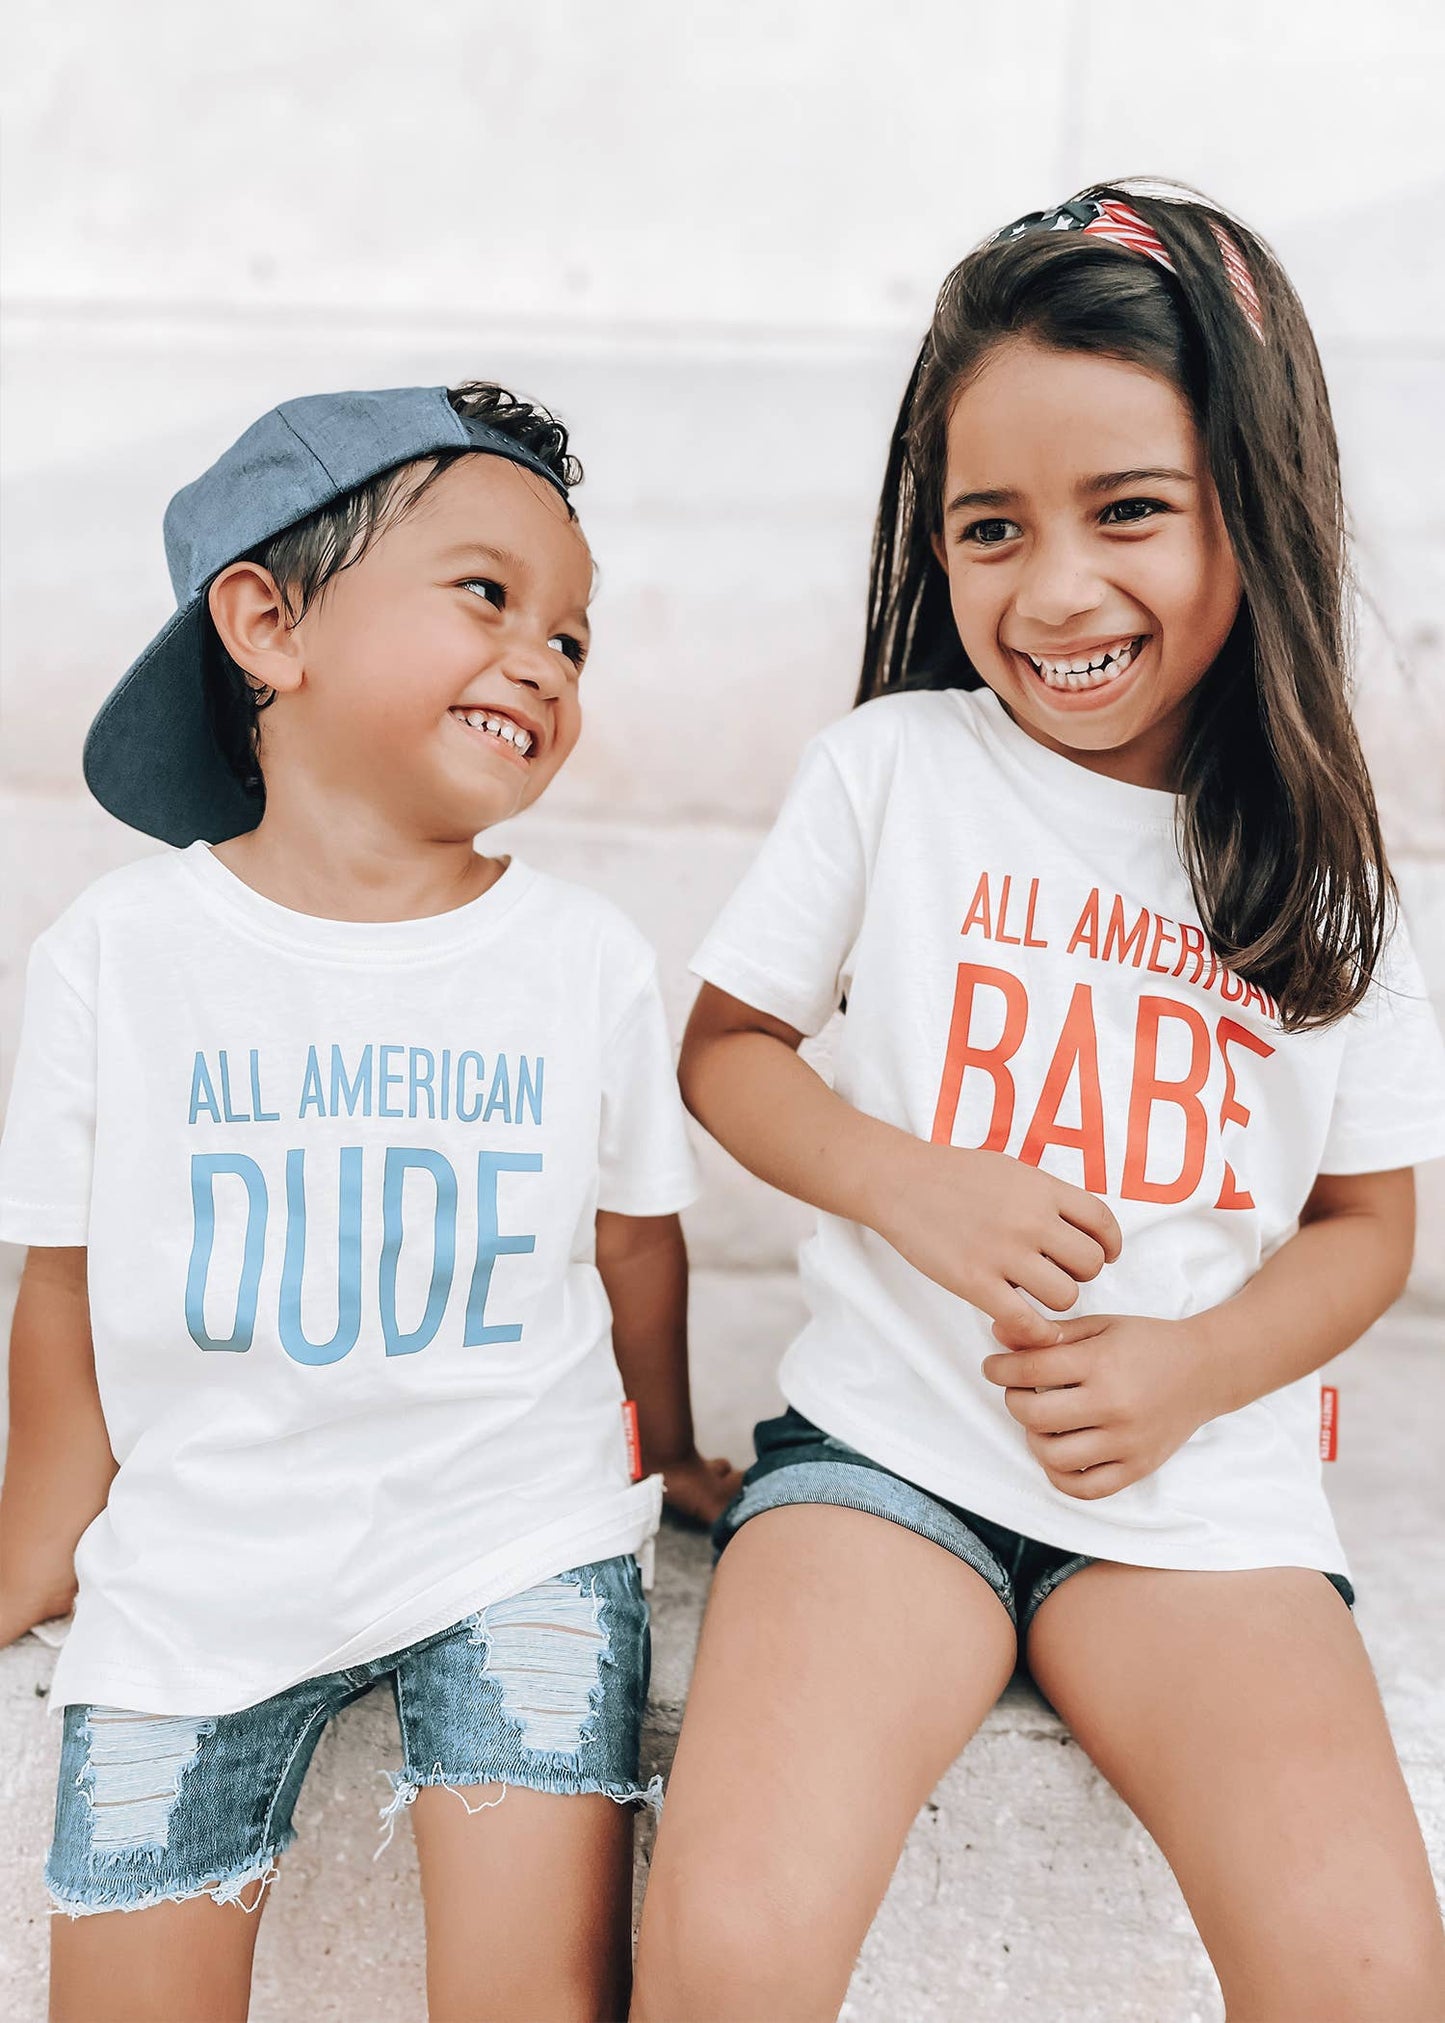 97 Design Co. - All American Dude - Kids T-shirt, 4th of July, Olympics Tee